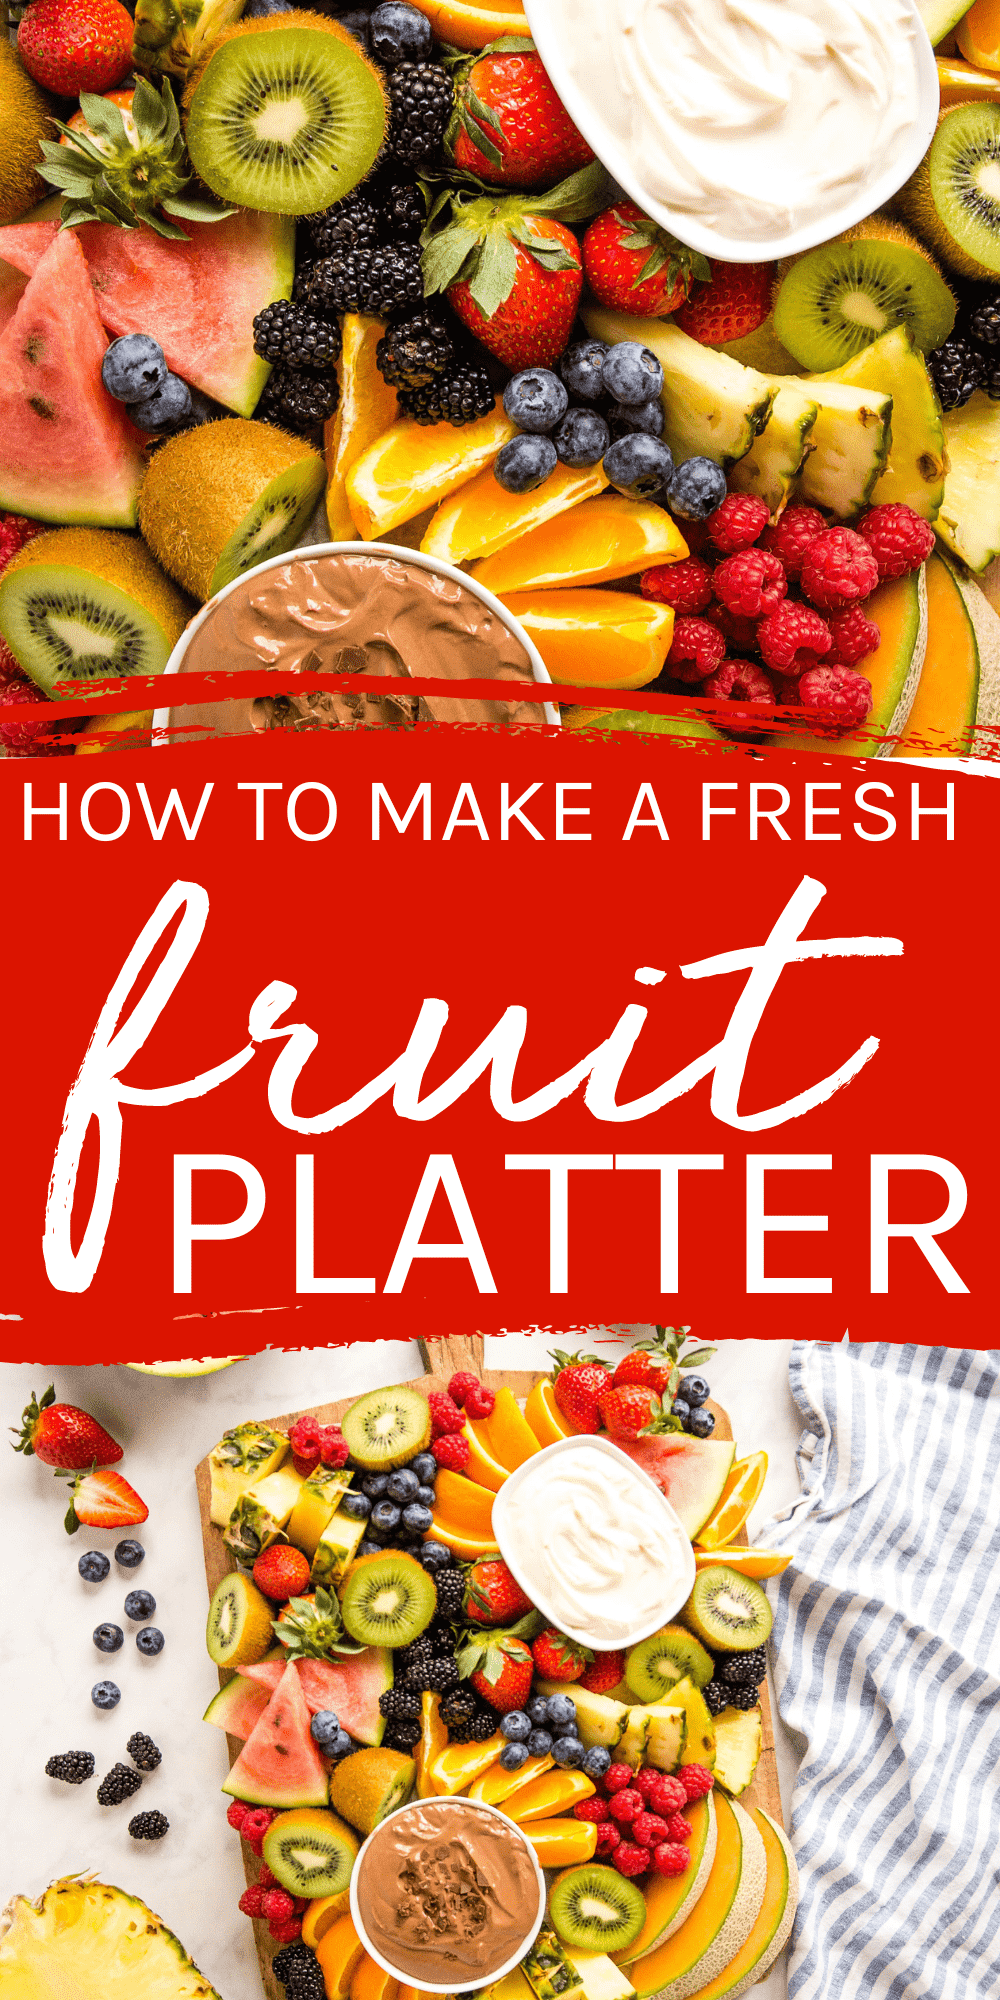 This Fruit Platter recipe is a healthy and colourful addition to any breakfast, brunch or dessert buffet. An easy-to-make fruit tray recipe with a variety of fresh fruits and fruit dip! Recipe from thebusybaker.ca! #fruitplatter #fruittray #fruittrayideas #howtomakeafruittray #howtomakeafruitplatter #fruit #healthydessert #desserttray #health #freshfruit #fruitfordessert via @busybakerblog